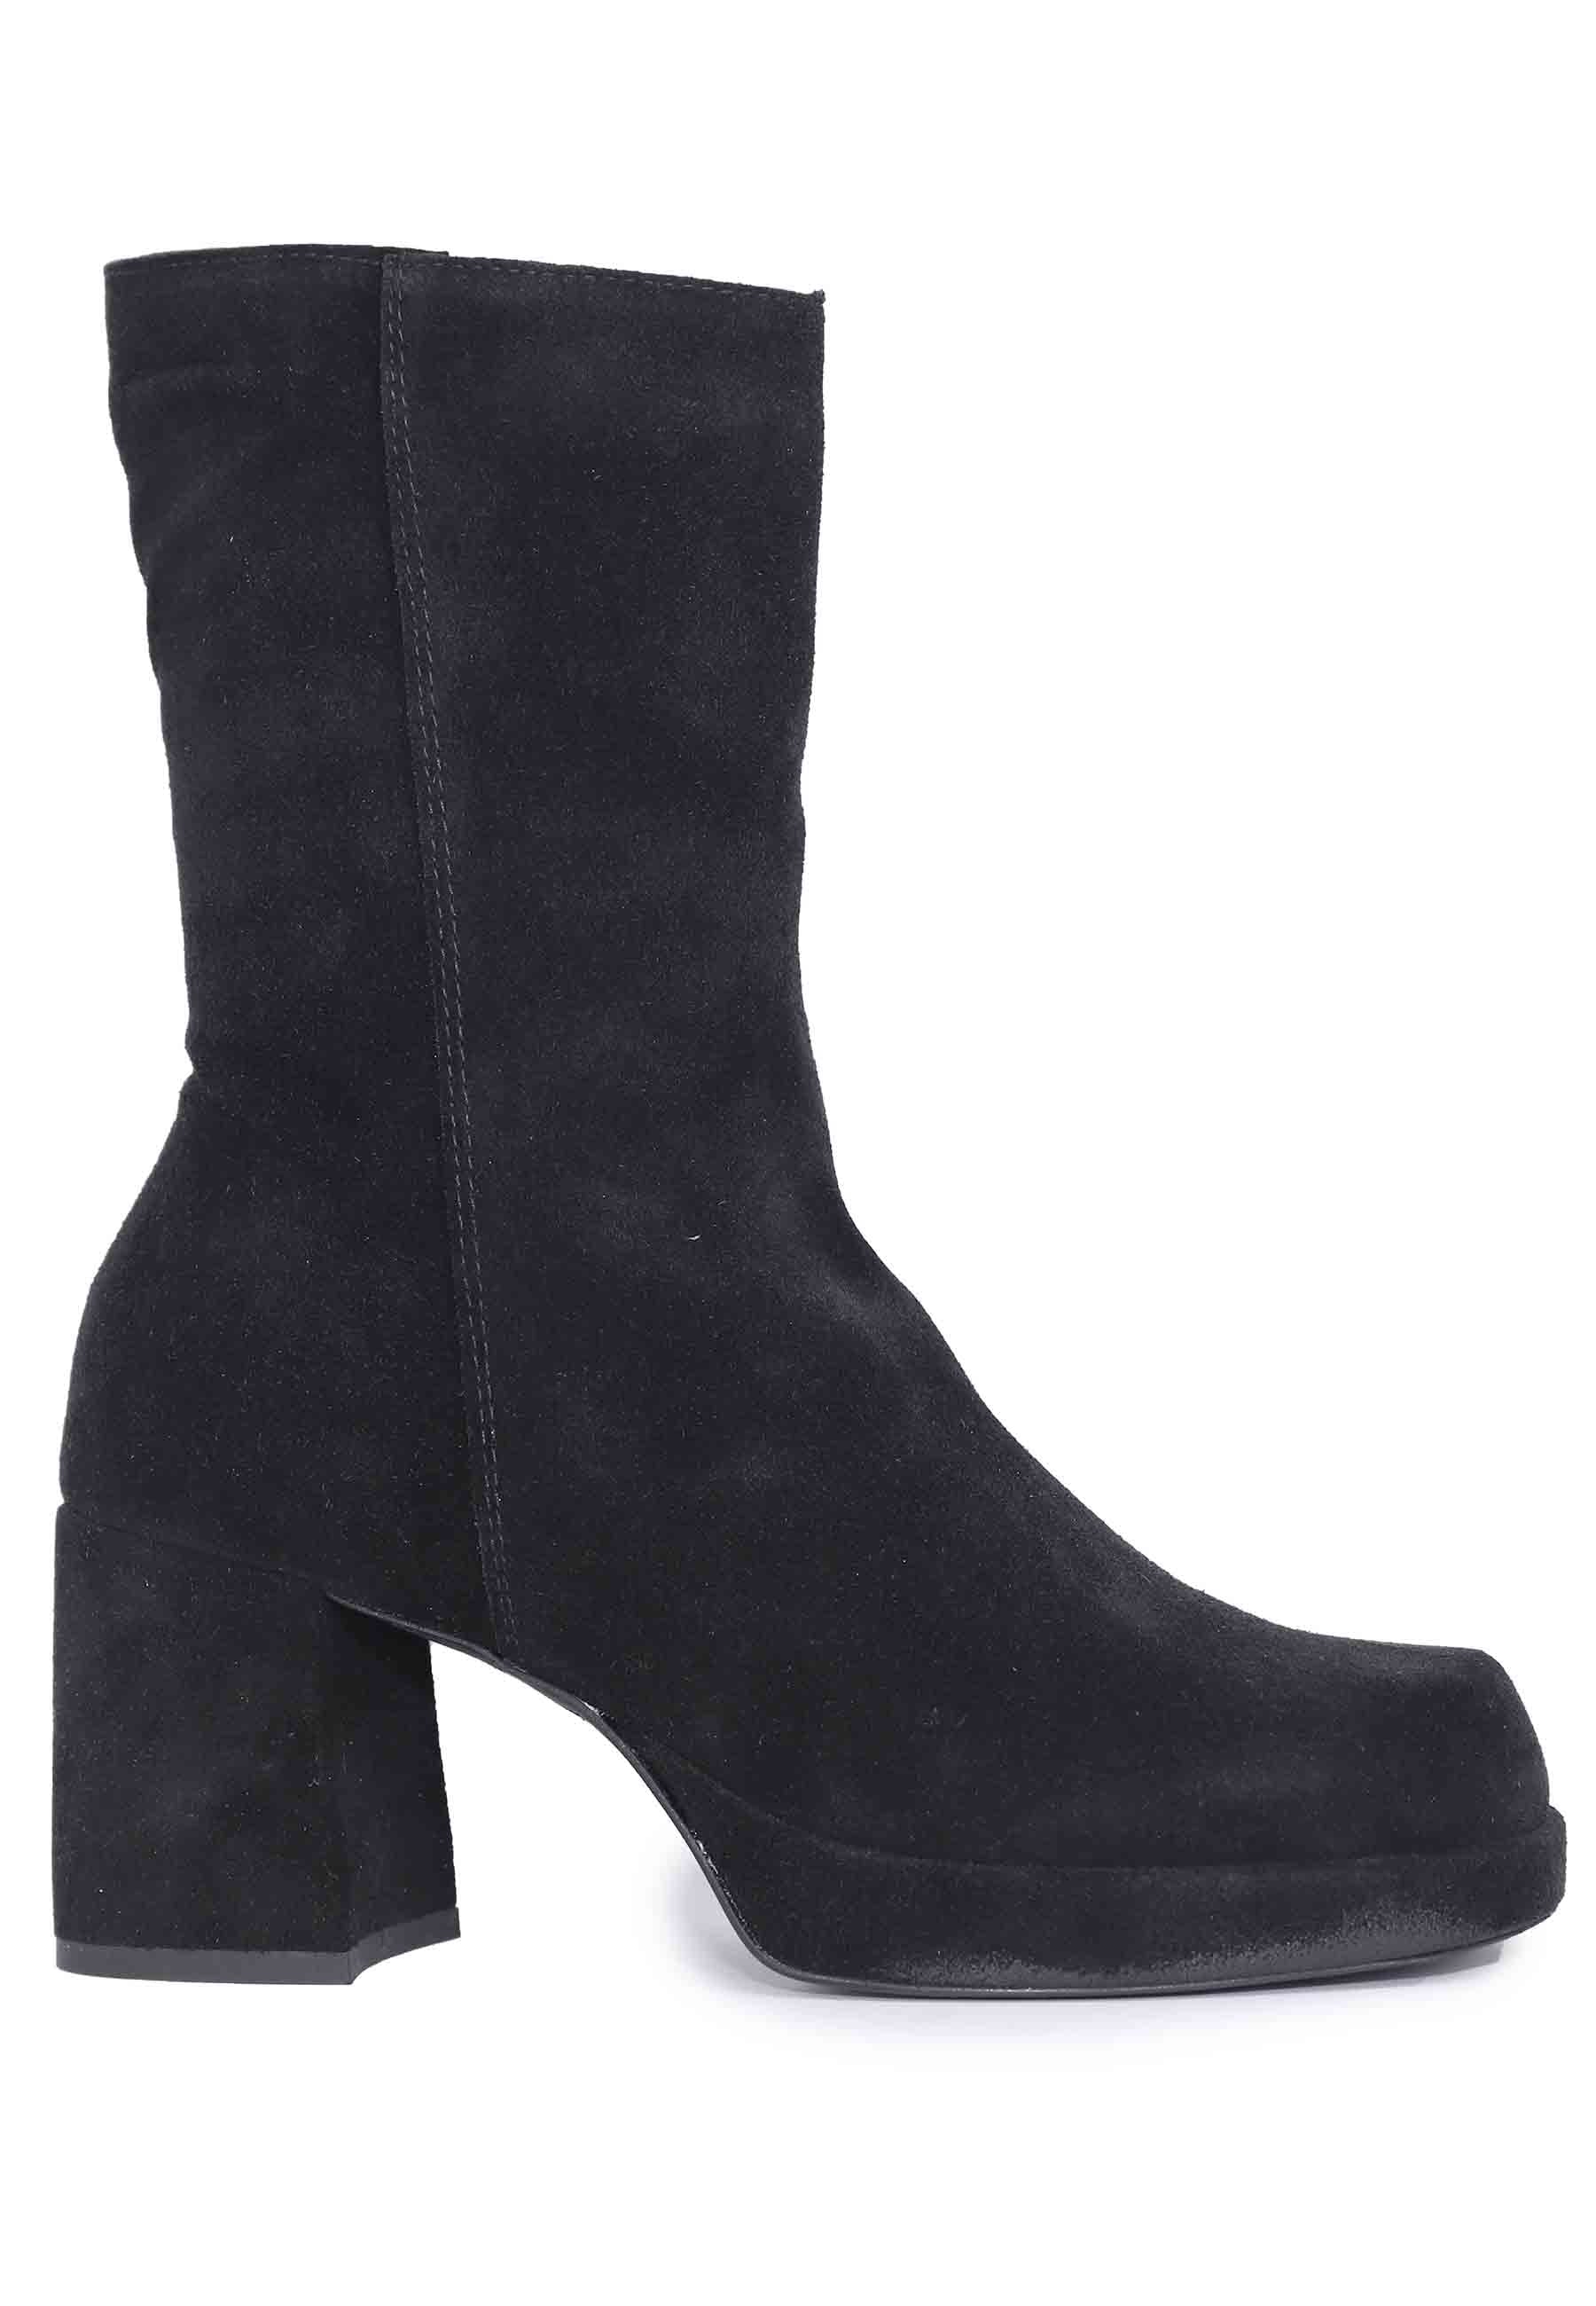 Women's ankle boots in black suede with heel and platform